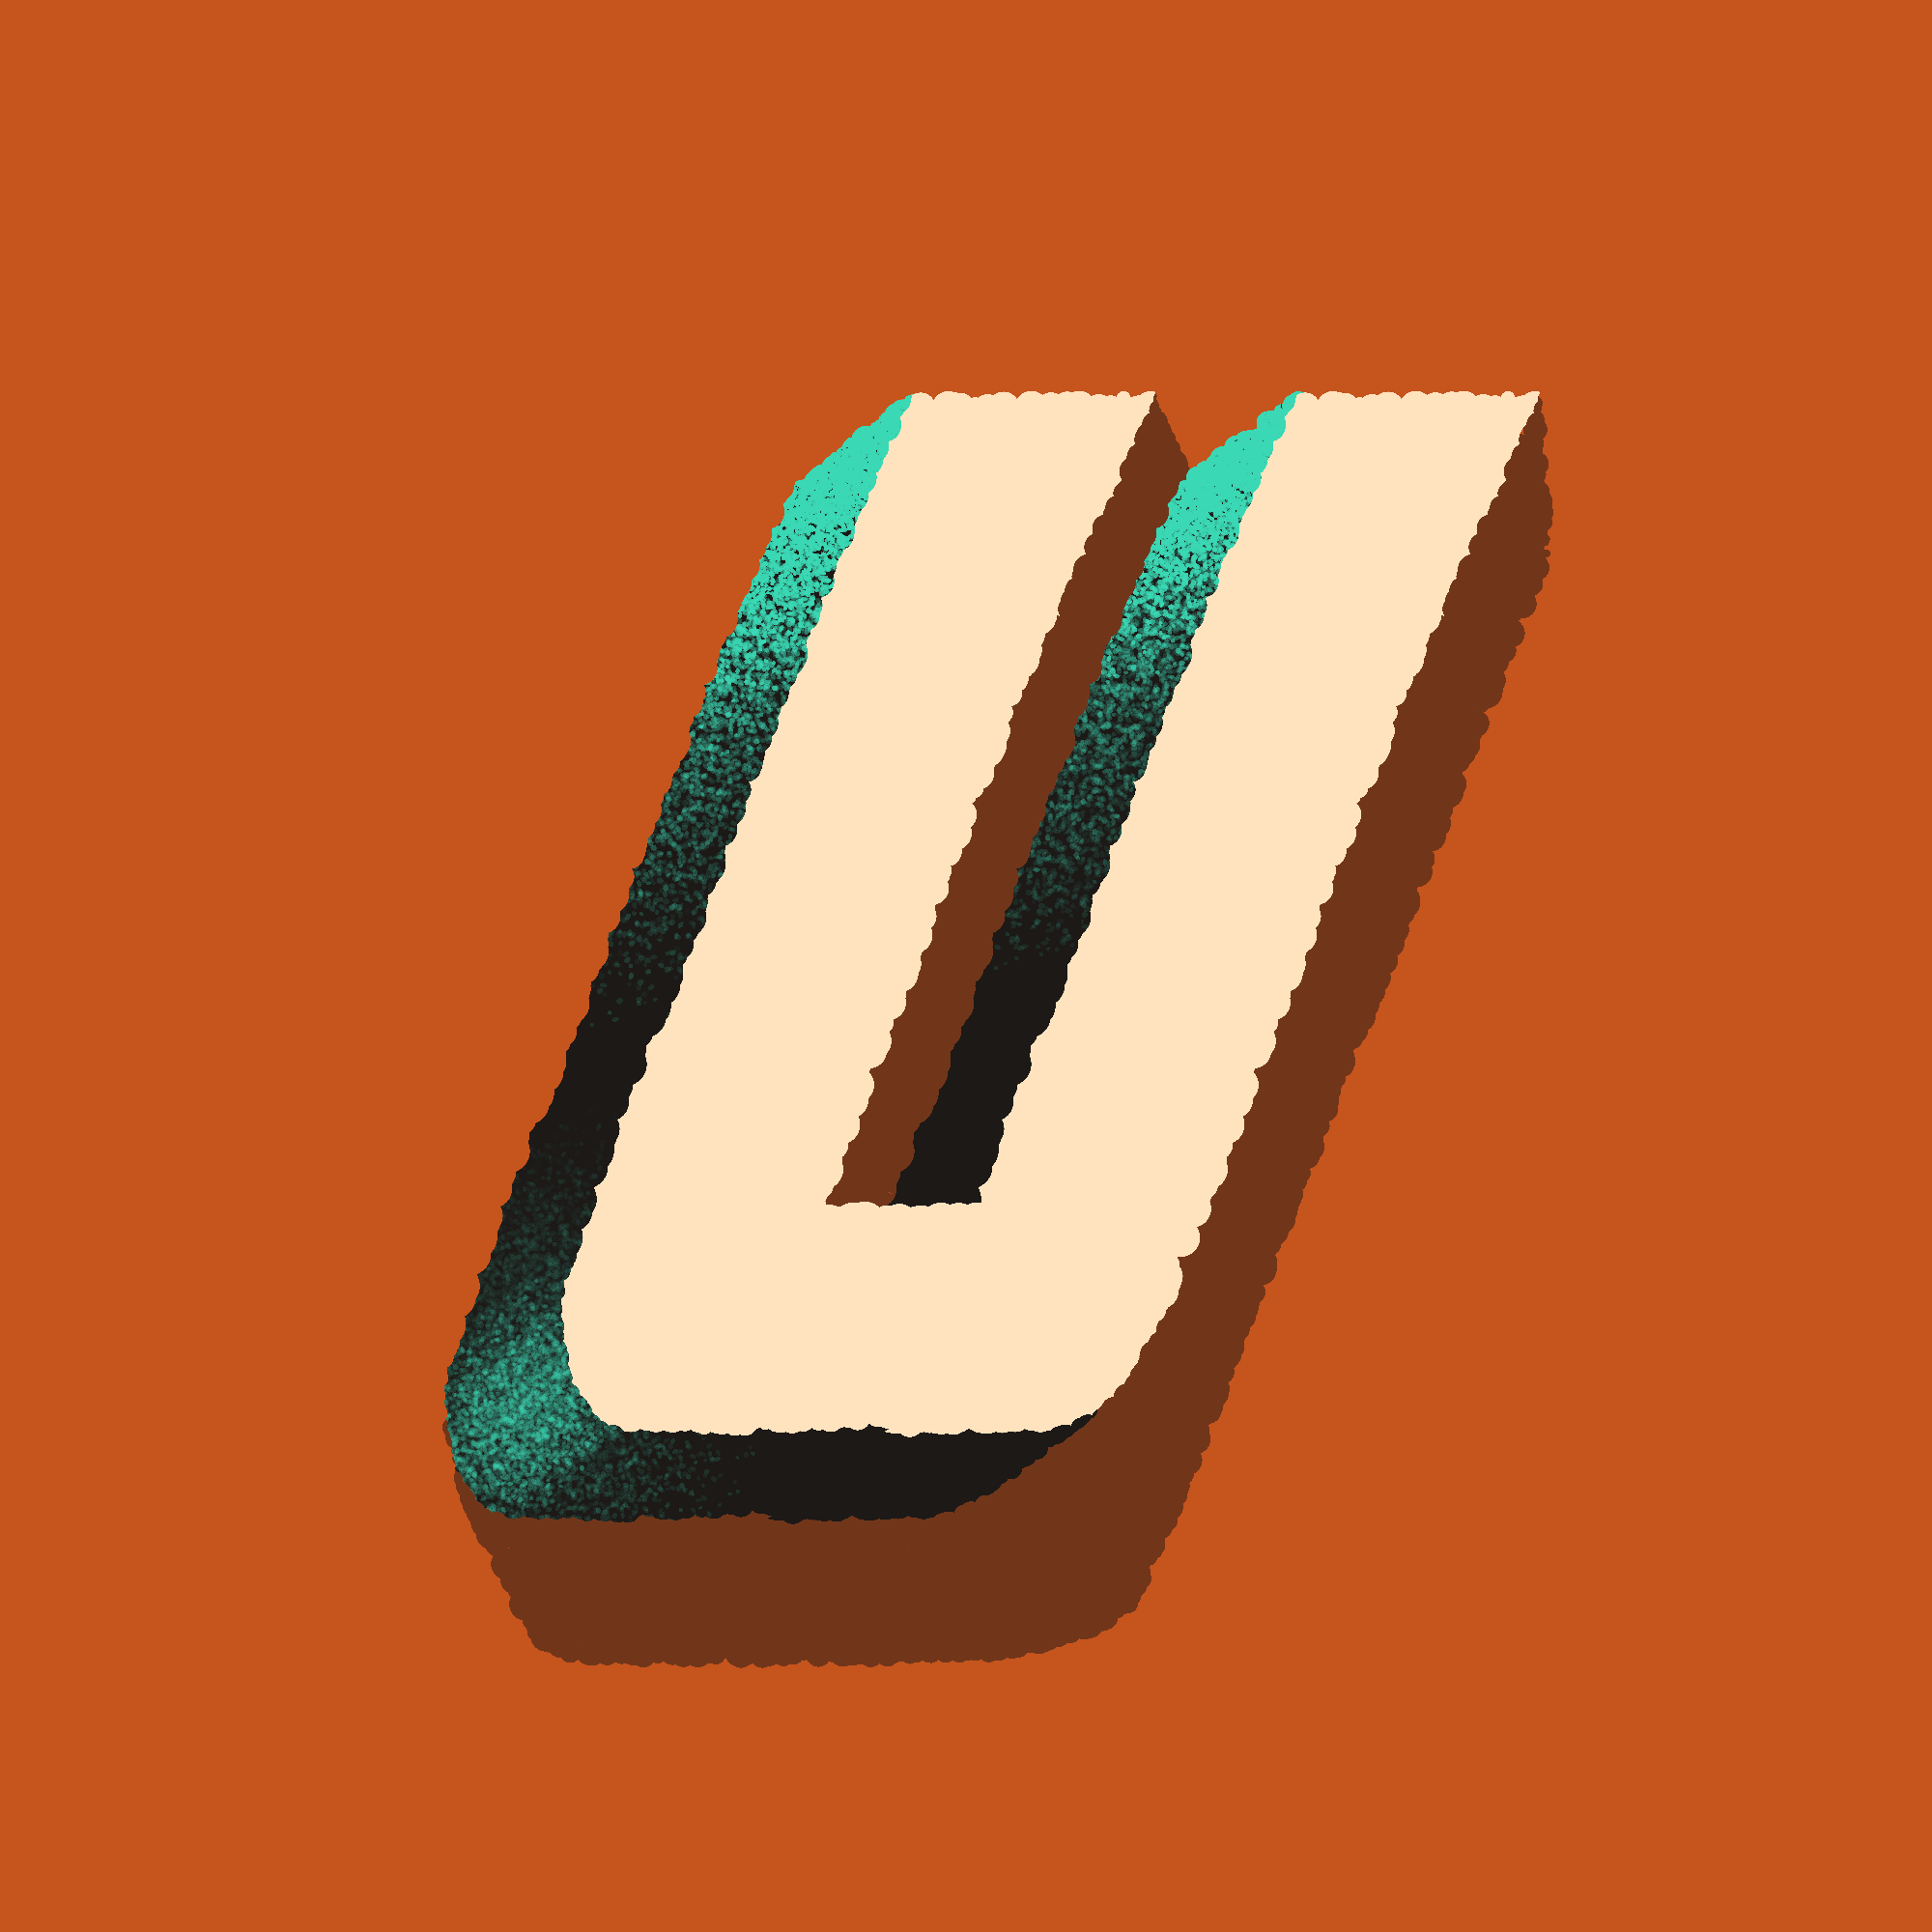 36-Days-of-Type-Day-21-U.png